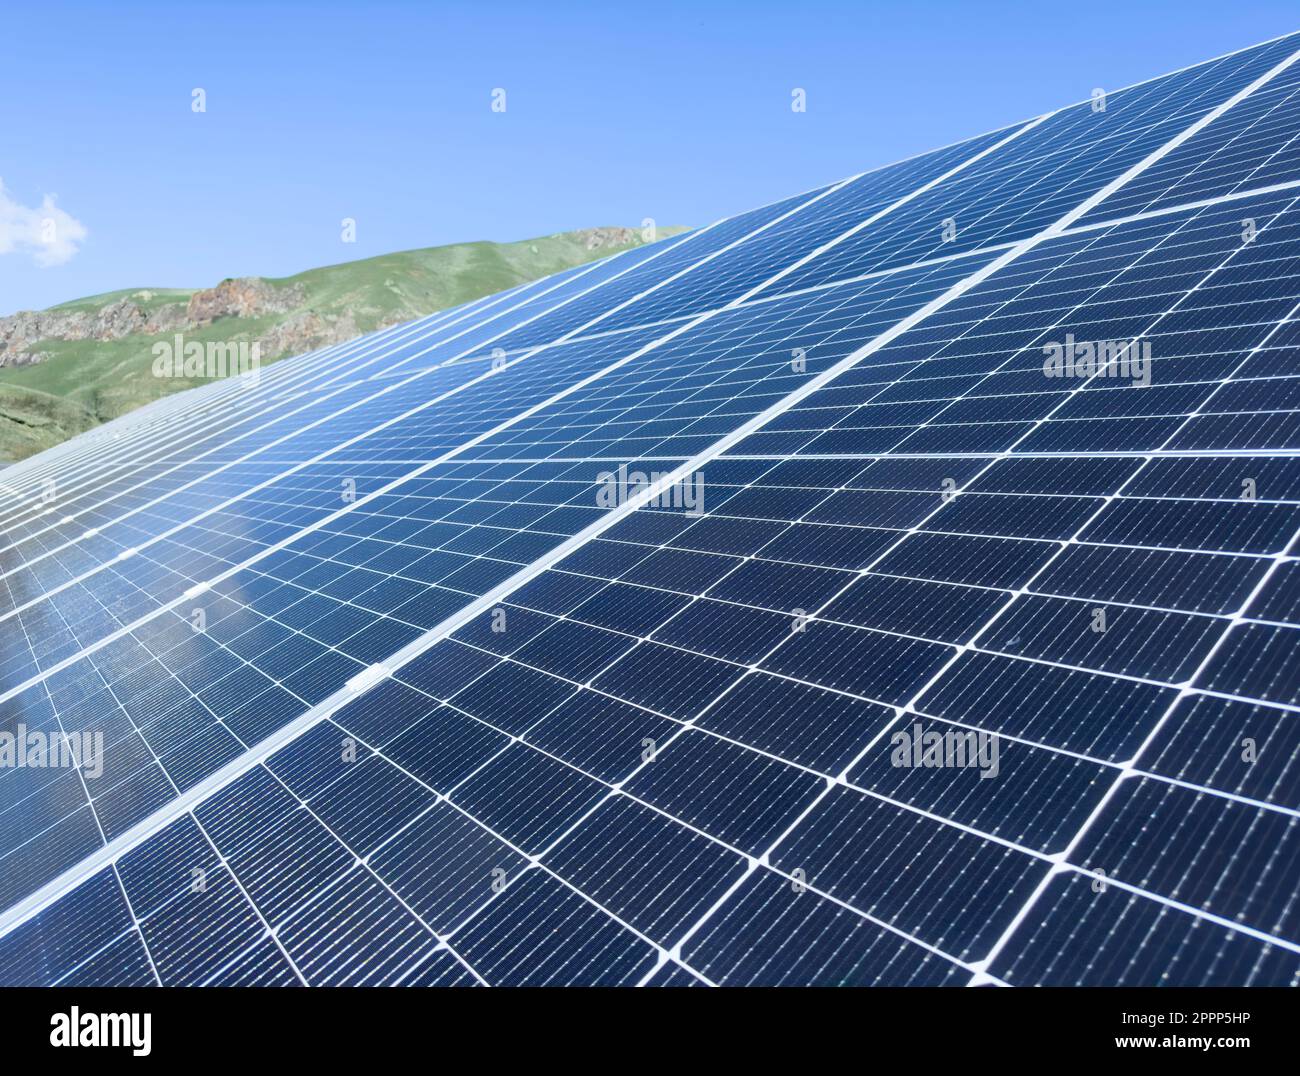 Blue Solar panel over blue sky, mountains, sun and clouds. Solar panels pattern for sustainable energy. Renewable solar energy. Alternative energy. Stock Photo